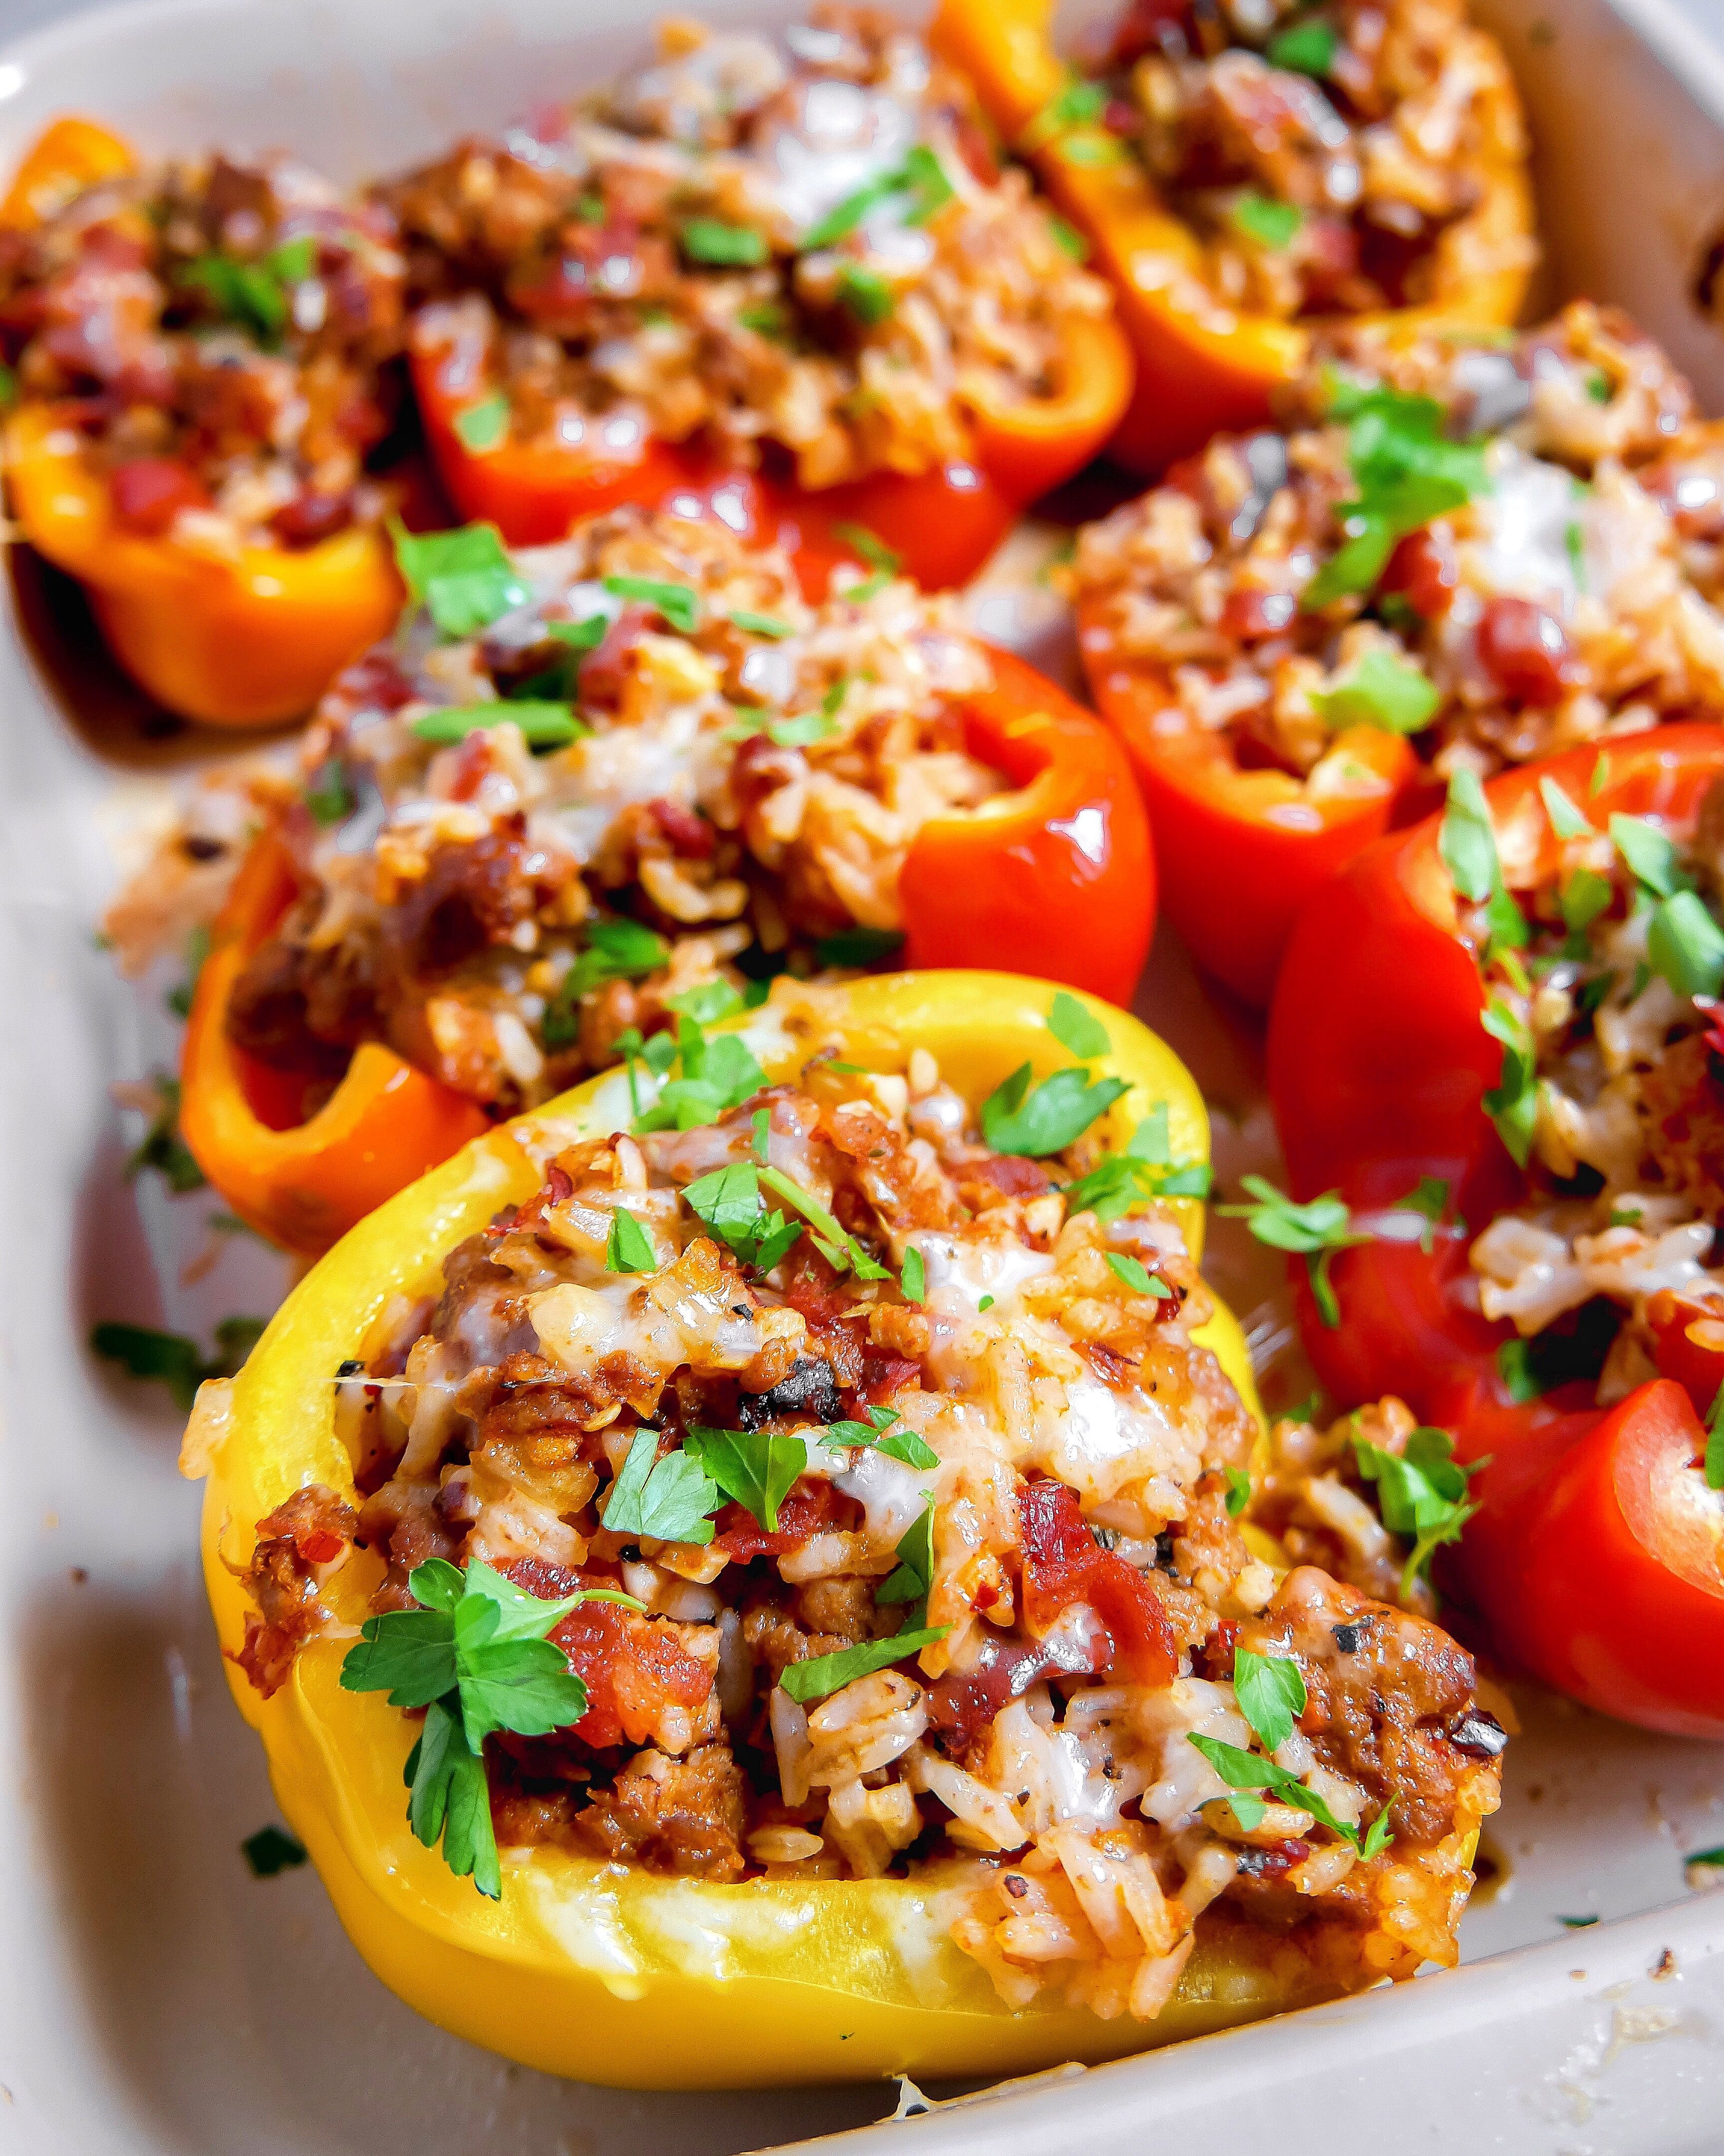 Hot Italian Sausage Stuffed Peppers Recipe By Stephanie The Feedfeed,How Wide Is A Queen Size Bed